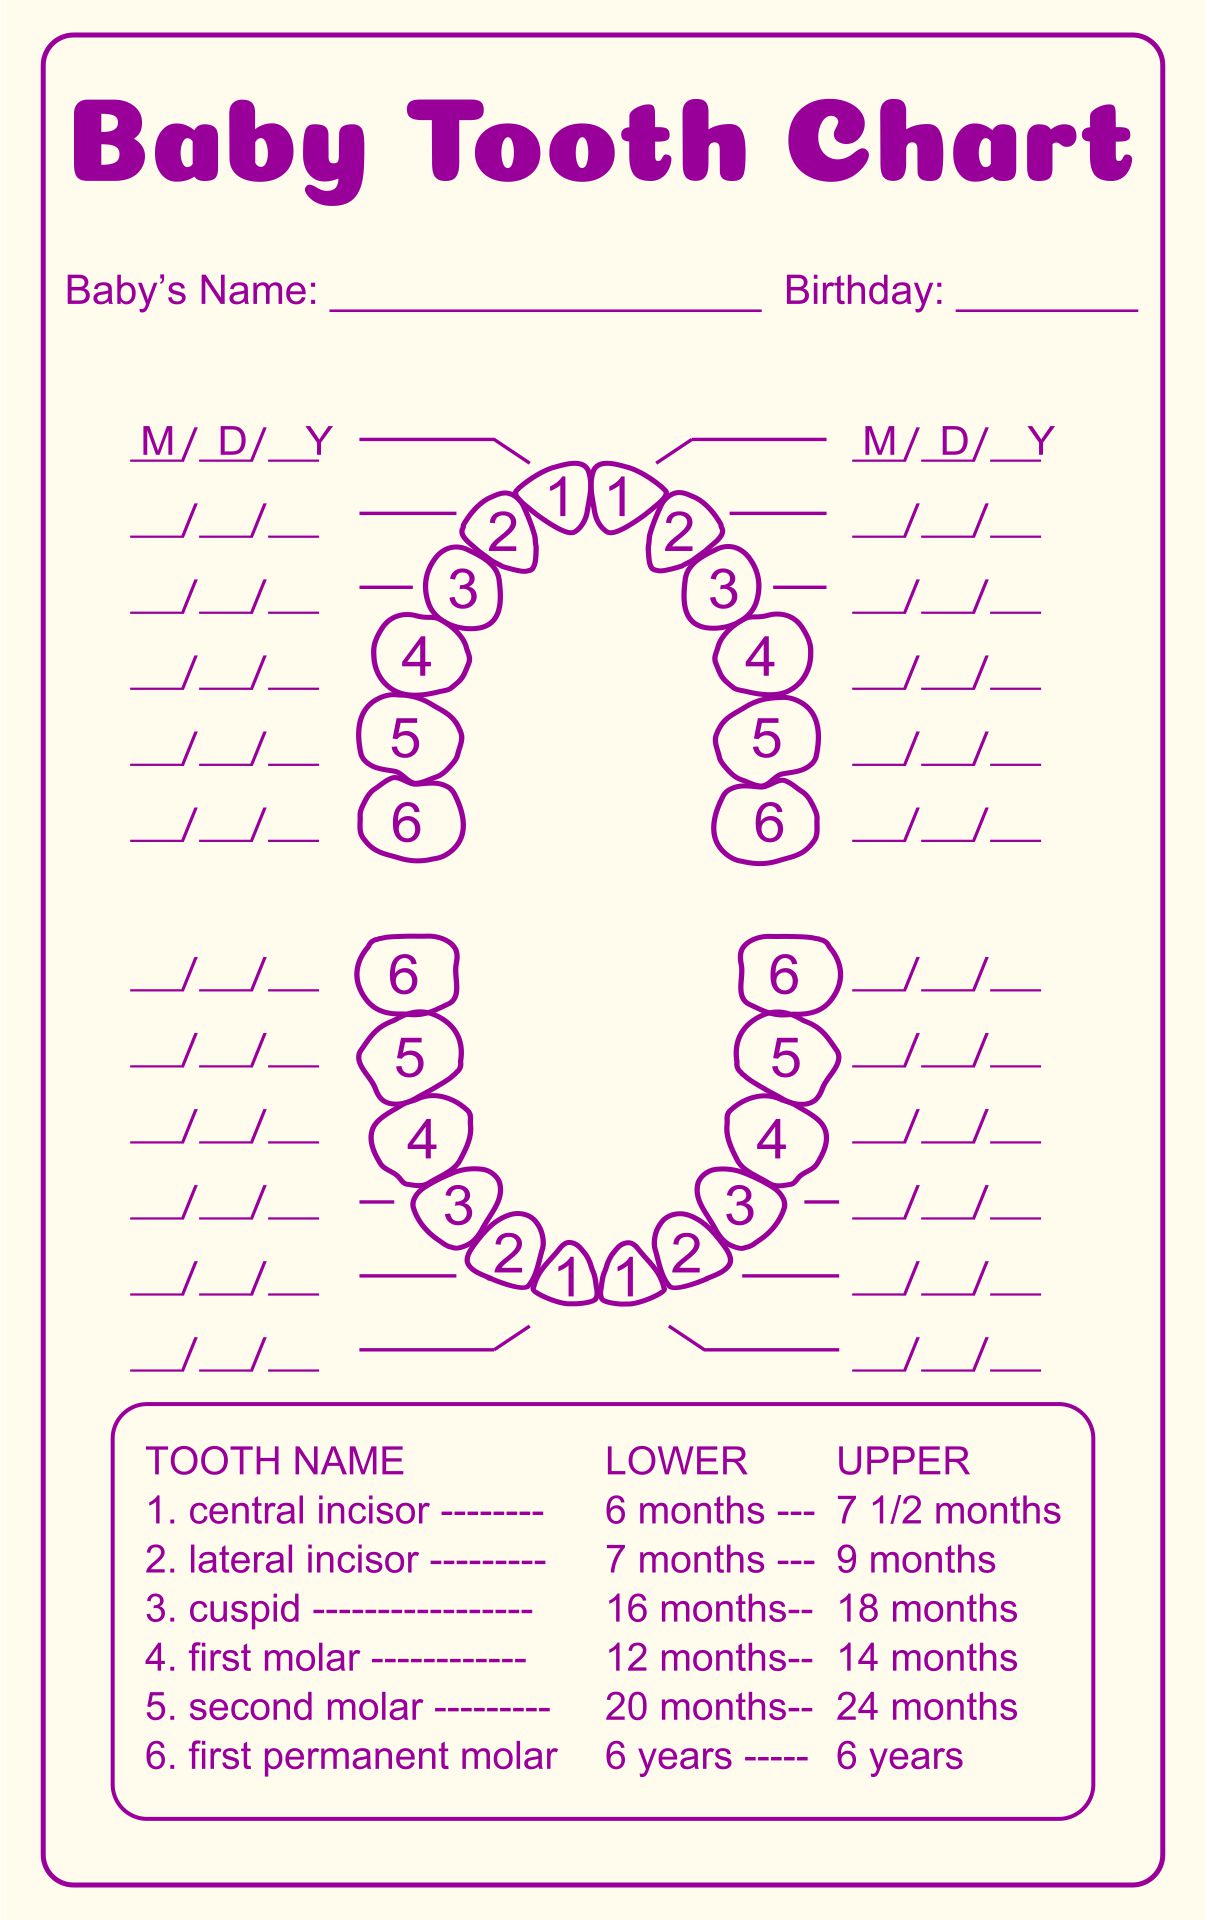 8-best-images-of-tooth-chart-printable-full-sheet-dental-chart-teeth-images